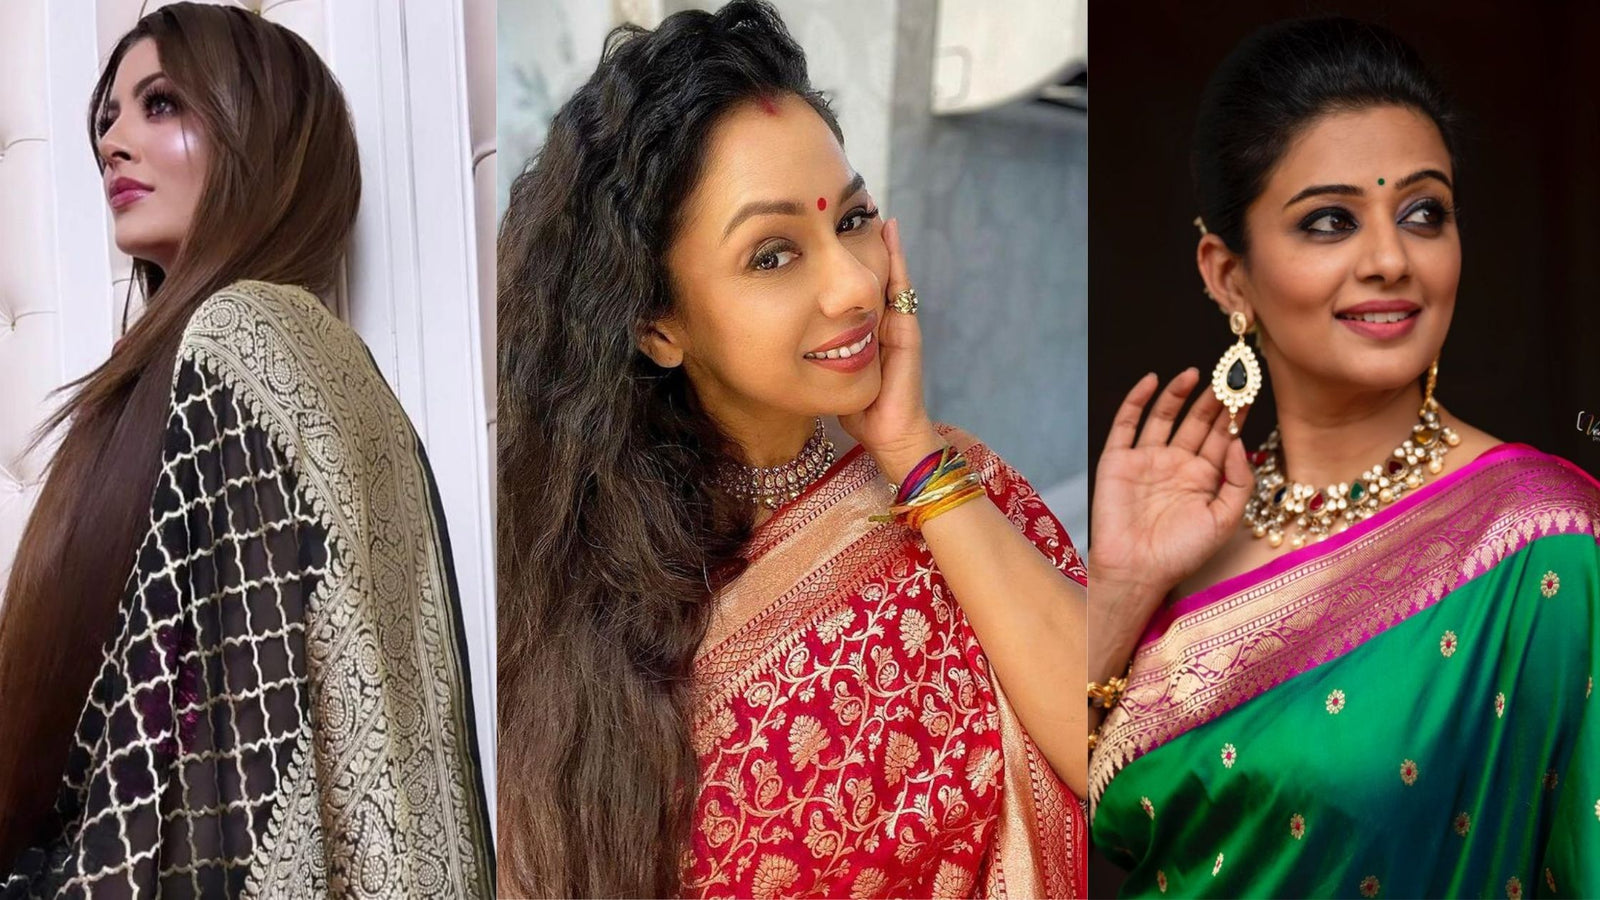 Bollywood Celebrities Loved the Banarasi Saree by Sacred Weaves